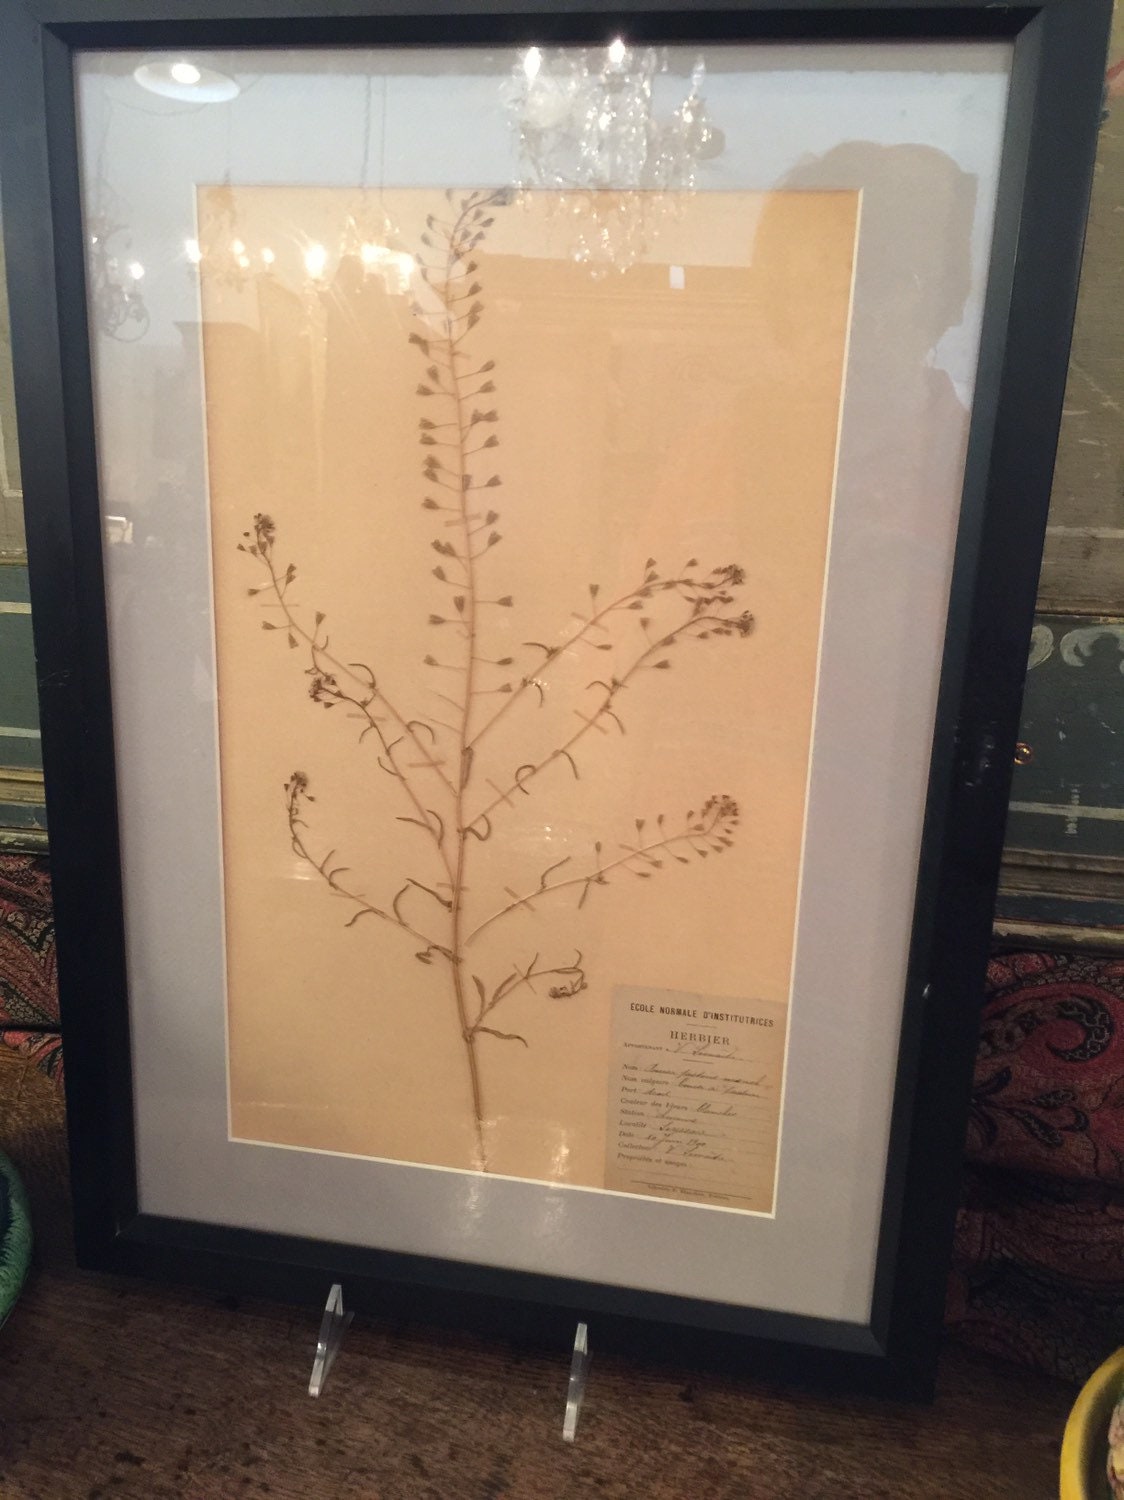 Create Your Own Pressed Botanical Specimen – The Academy of